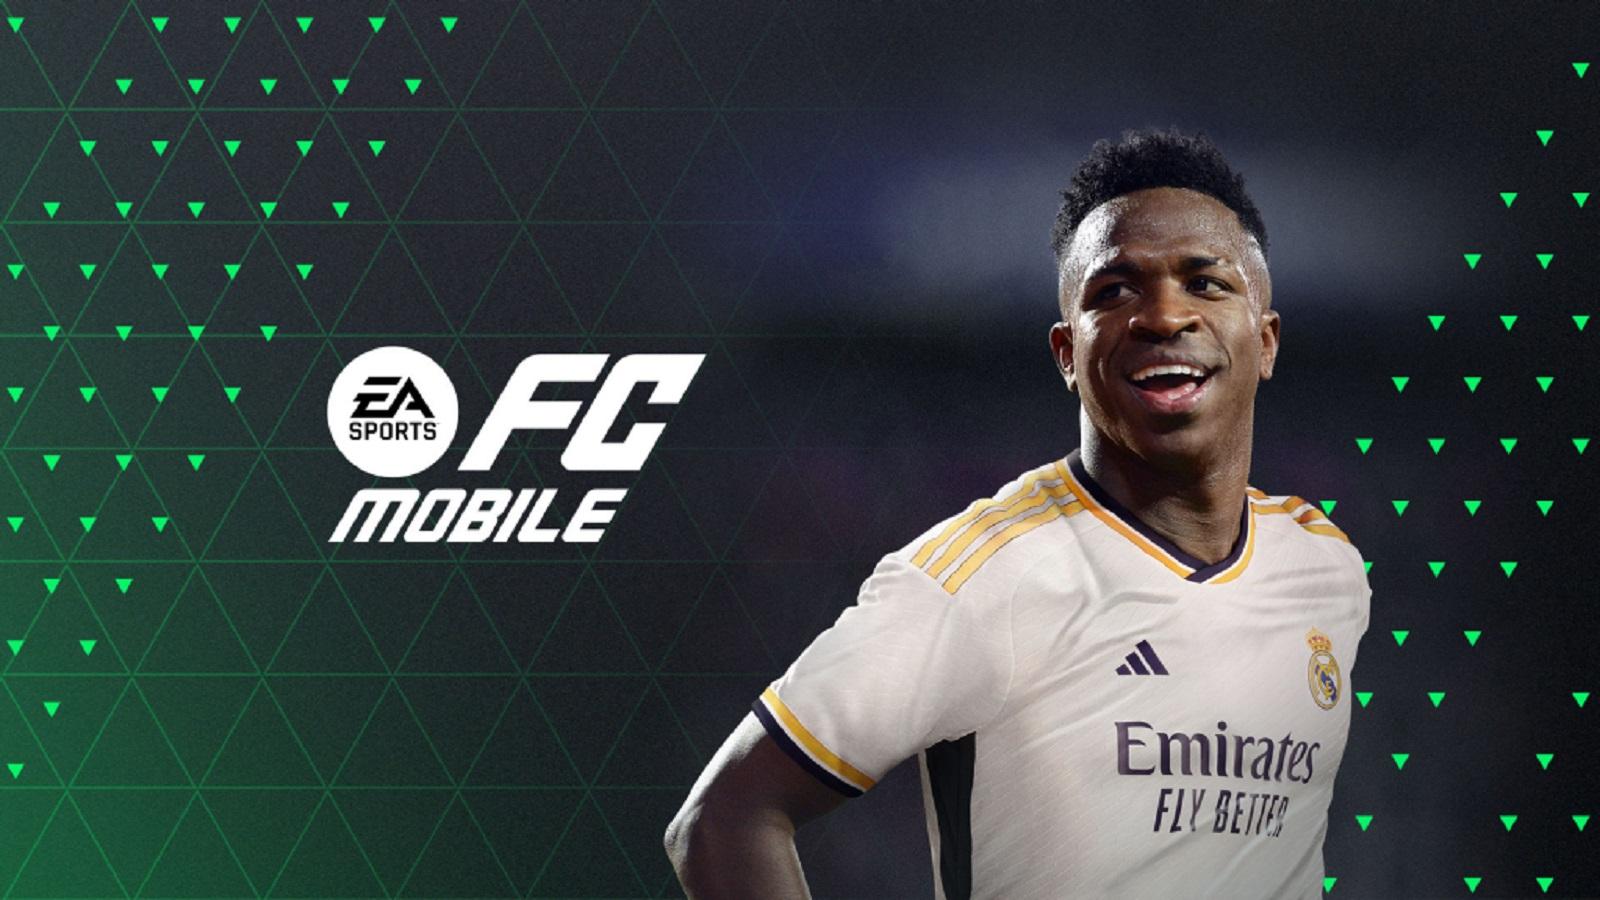 cover art for EA FC Mobile featuring Kylian Mbappe